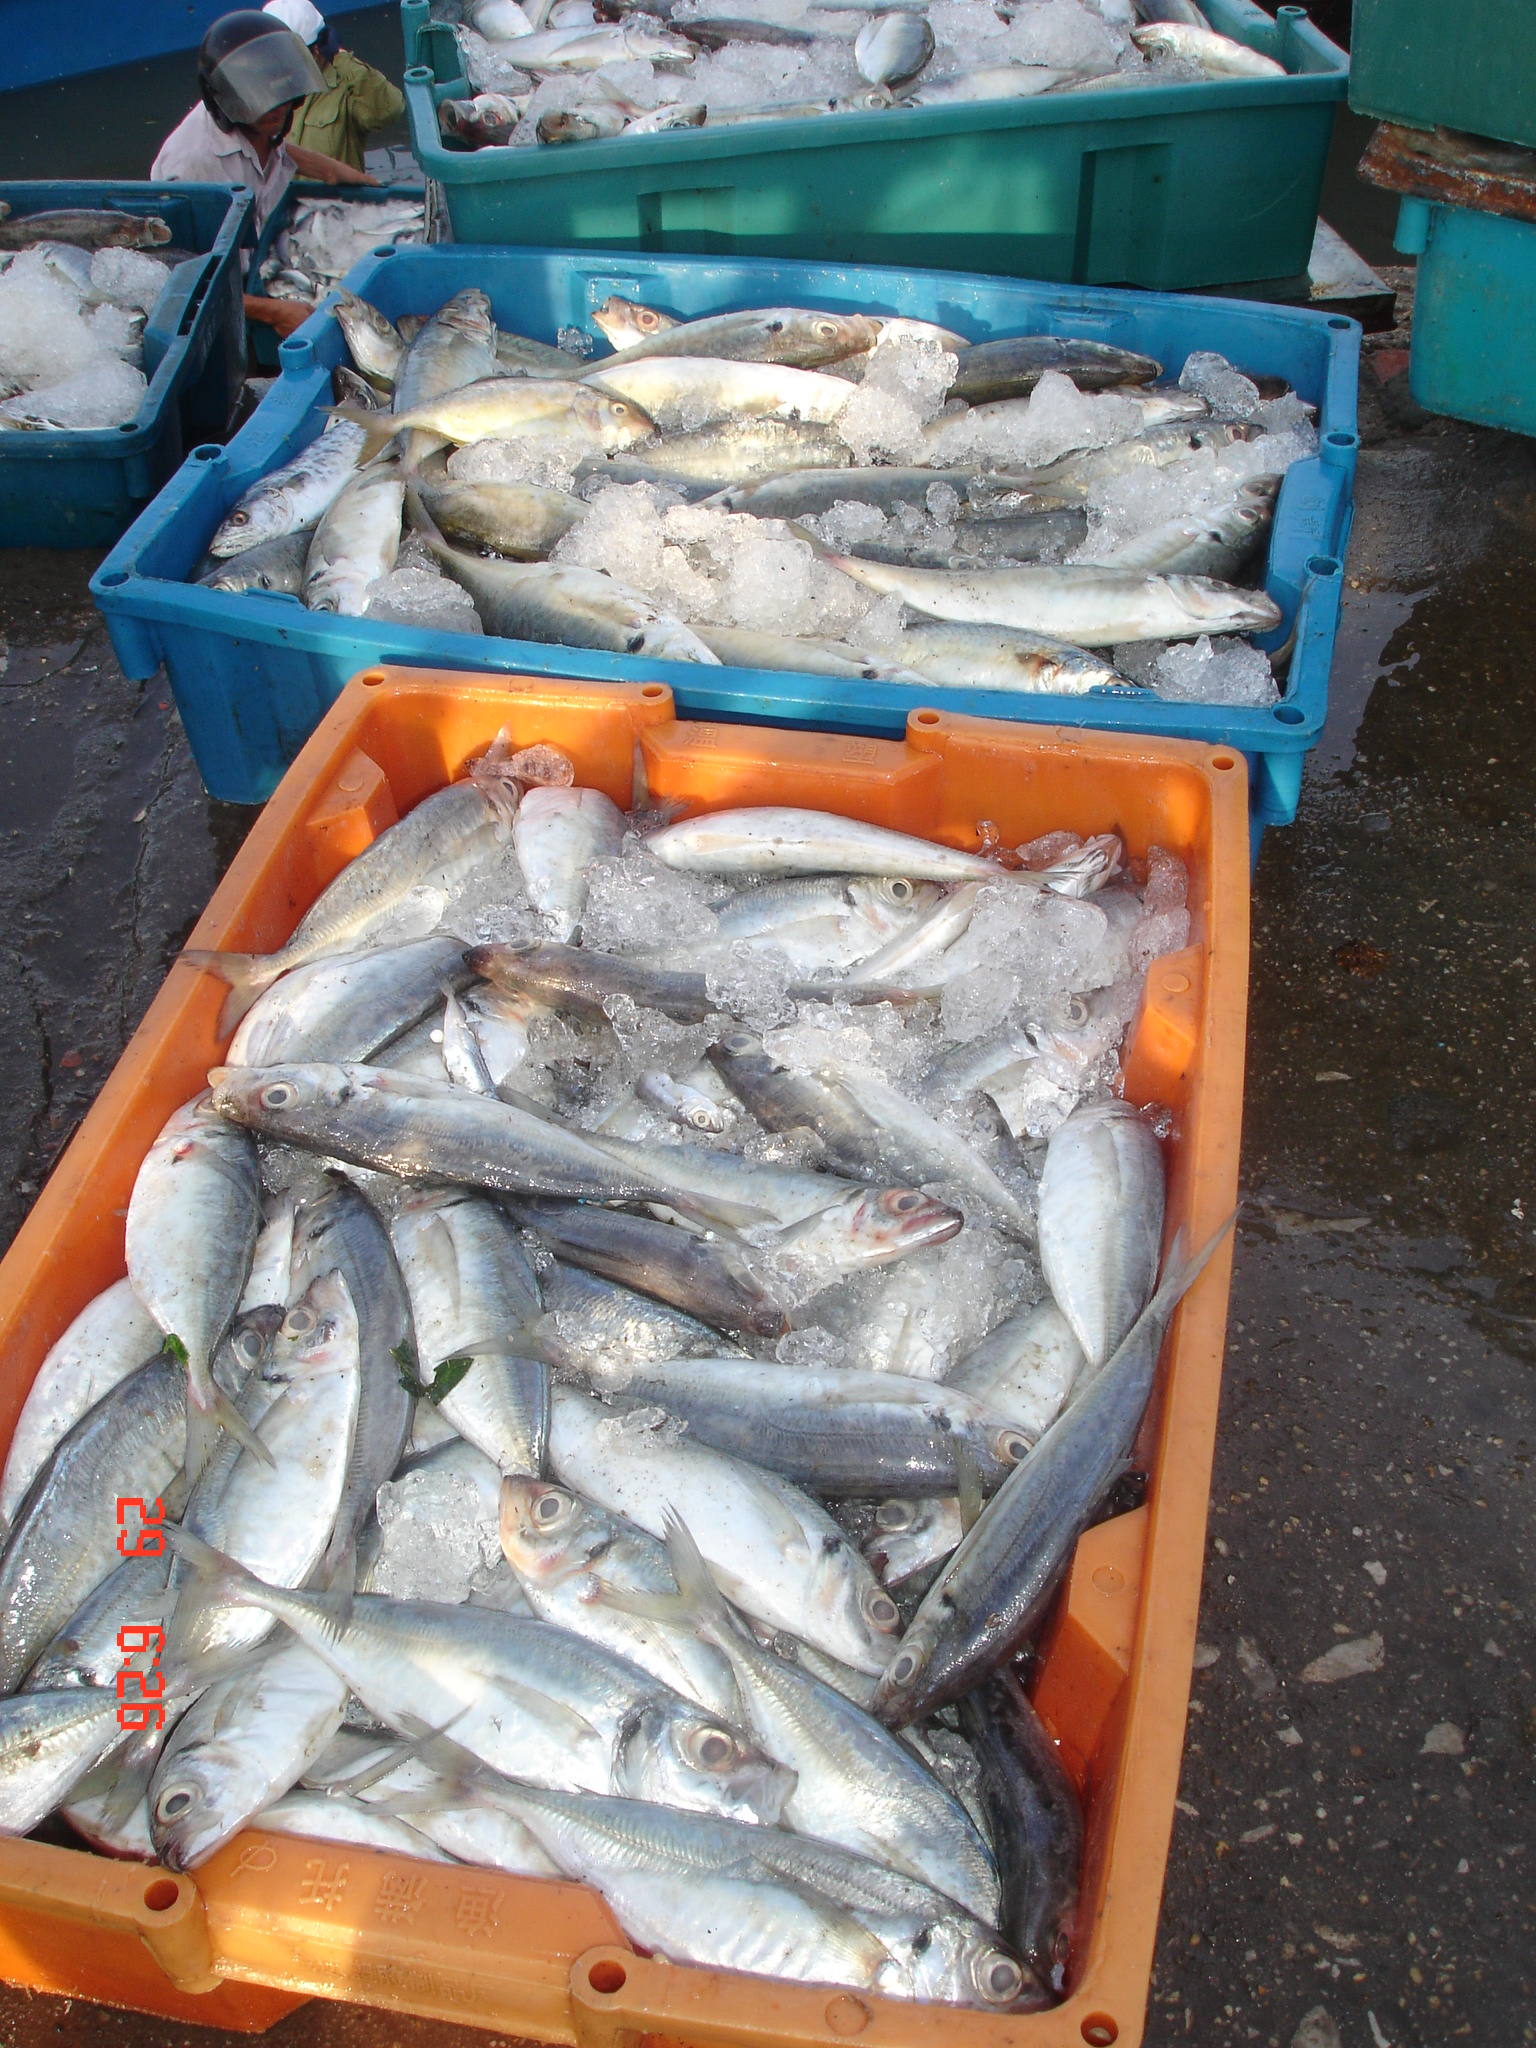 Quang Tri province: Trieu Phong district – Fishing yield in the first 10 months reached nearly 2,500 tons